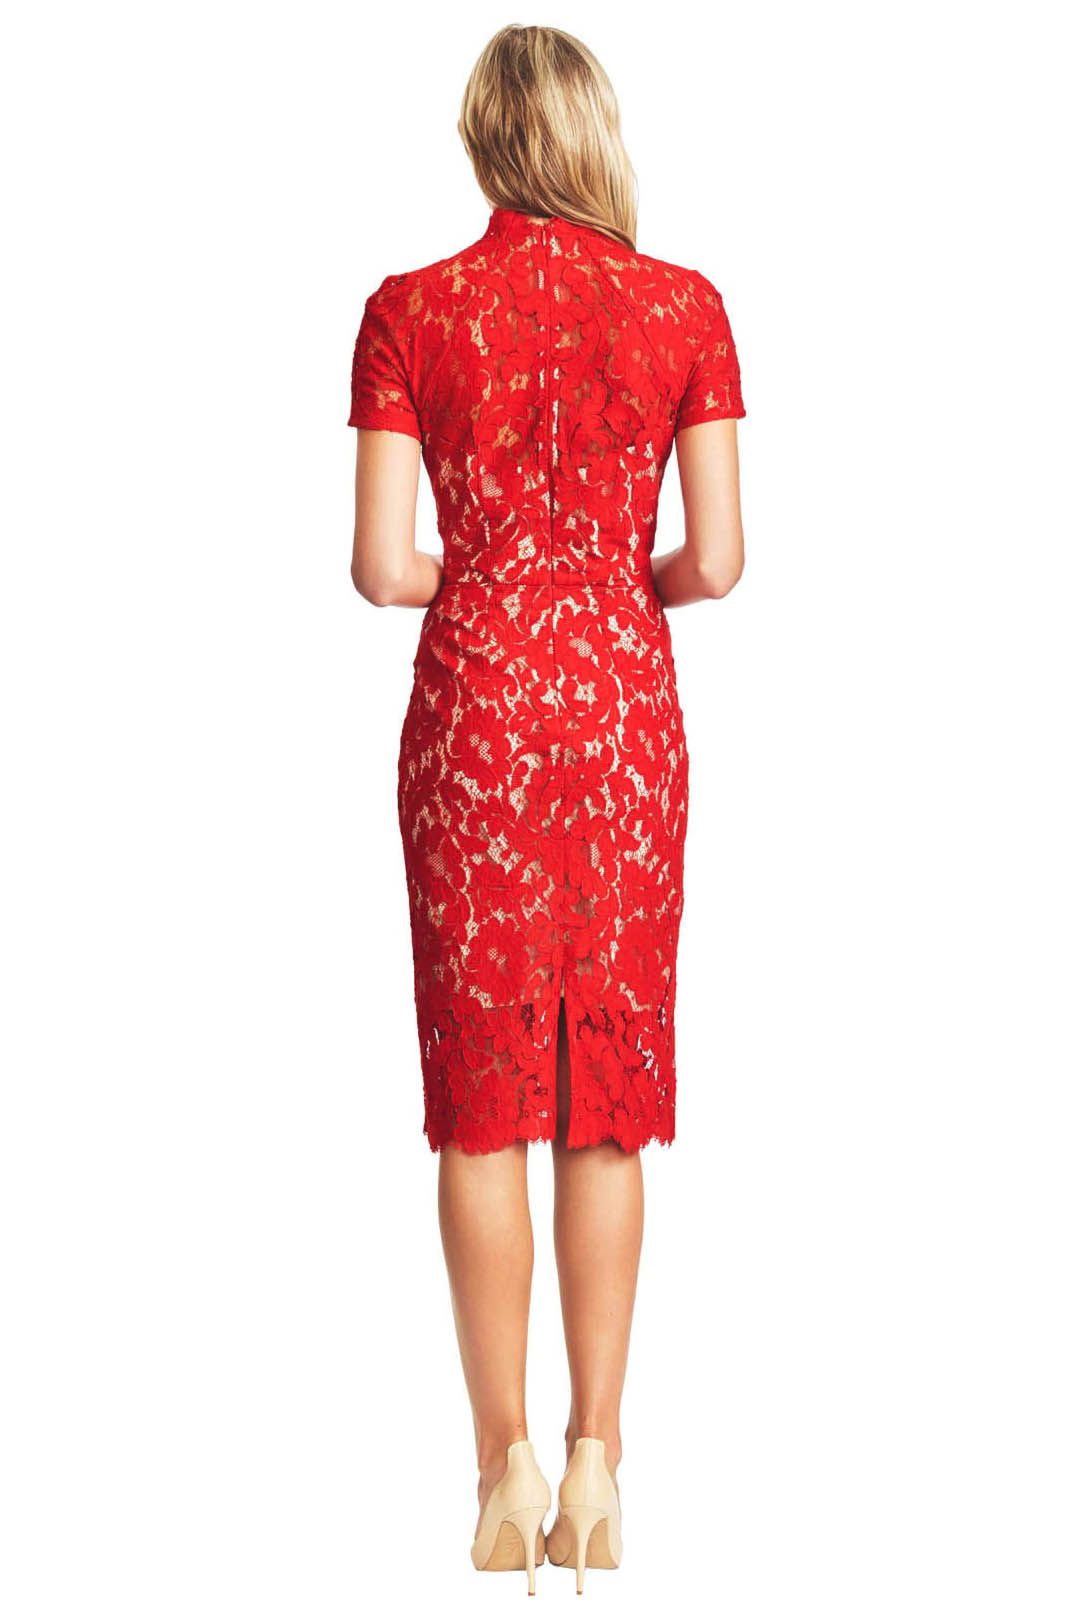 Lover - Midi Red Warrior Lace Dress - Red - Front